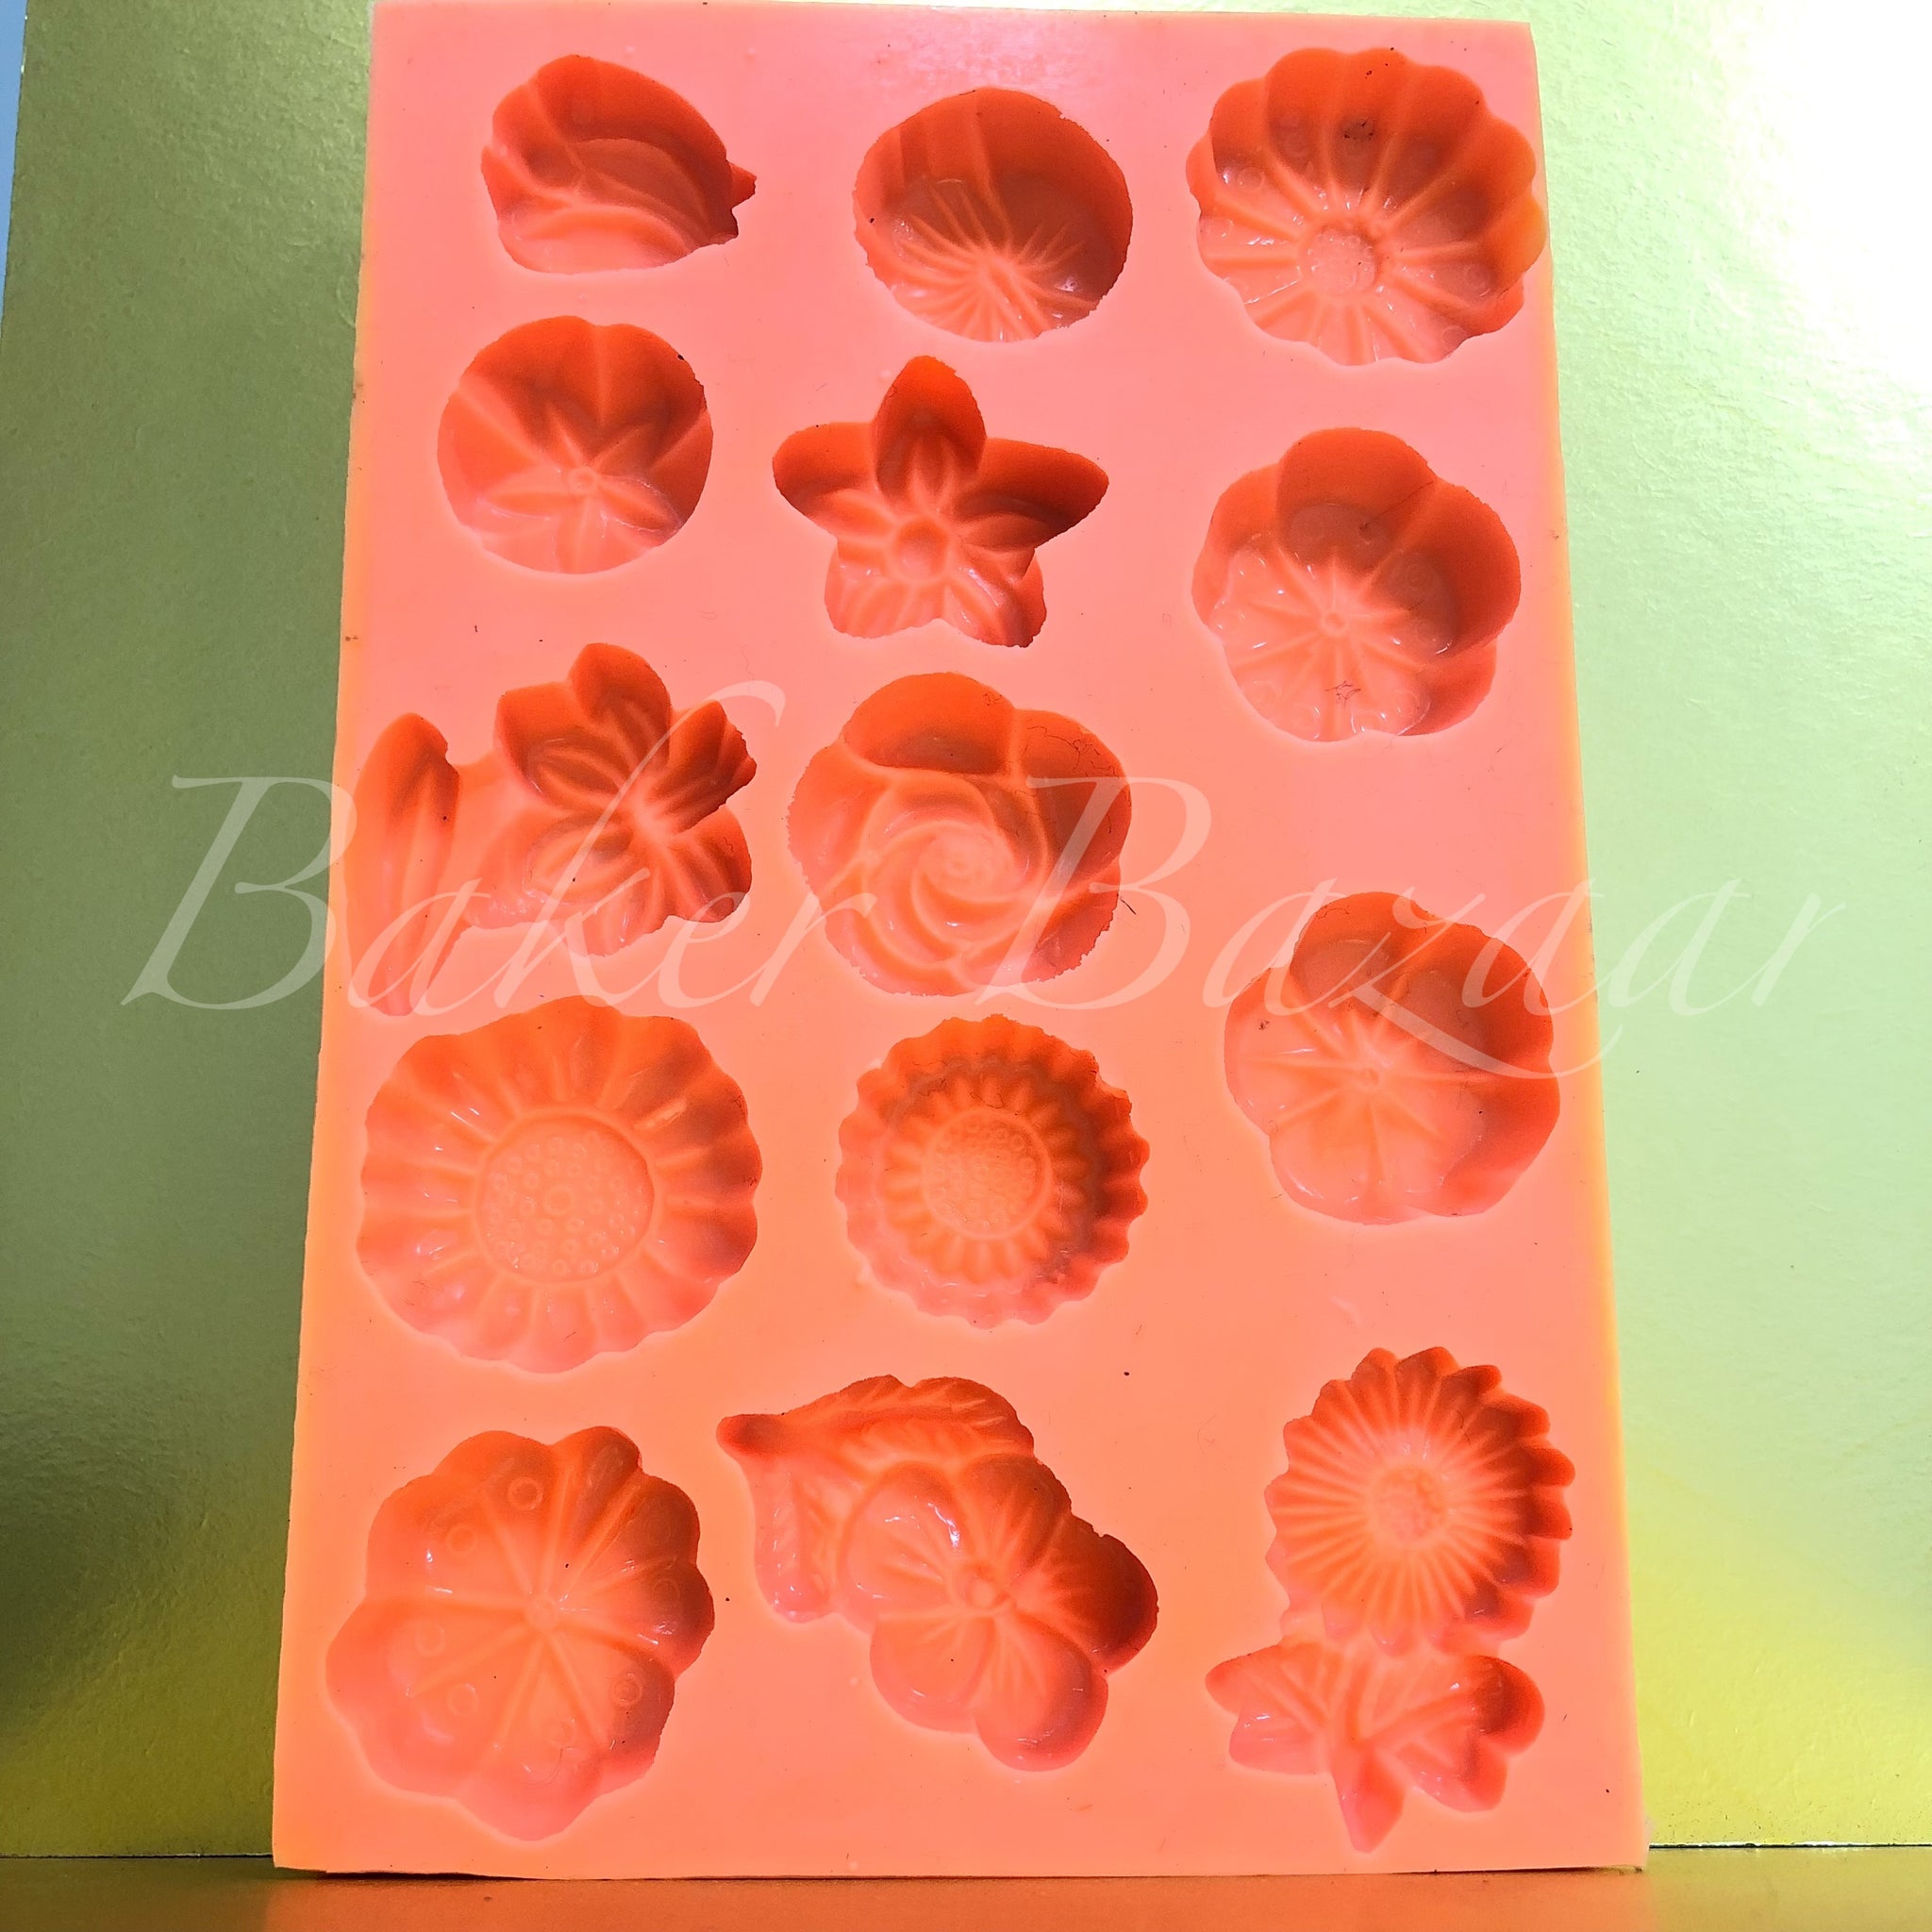 Marzipan Mould No.4 - Silicone Fondant Clay Marzipan Mould - Christmas Special